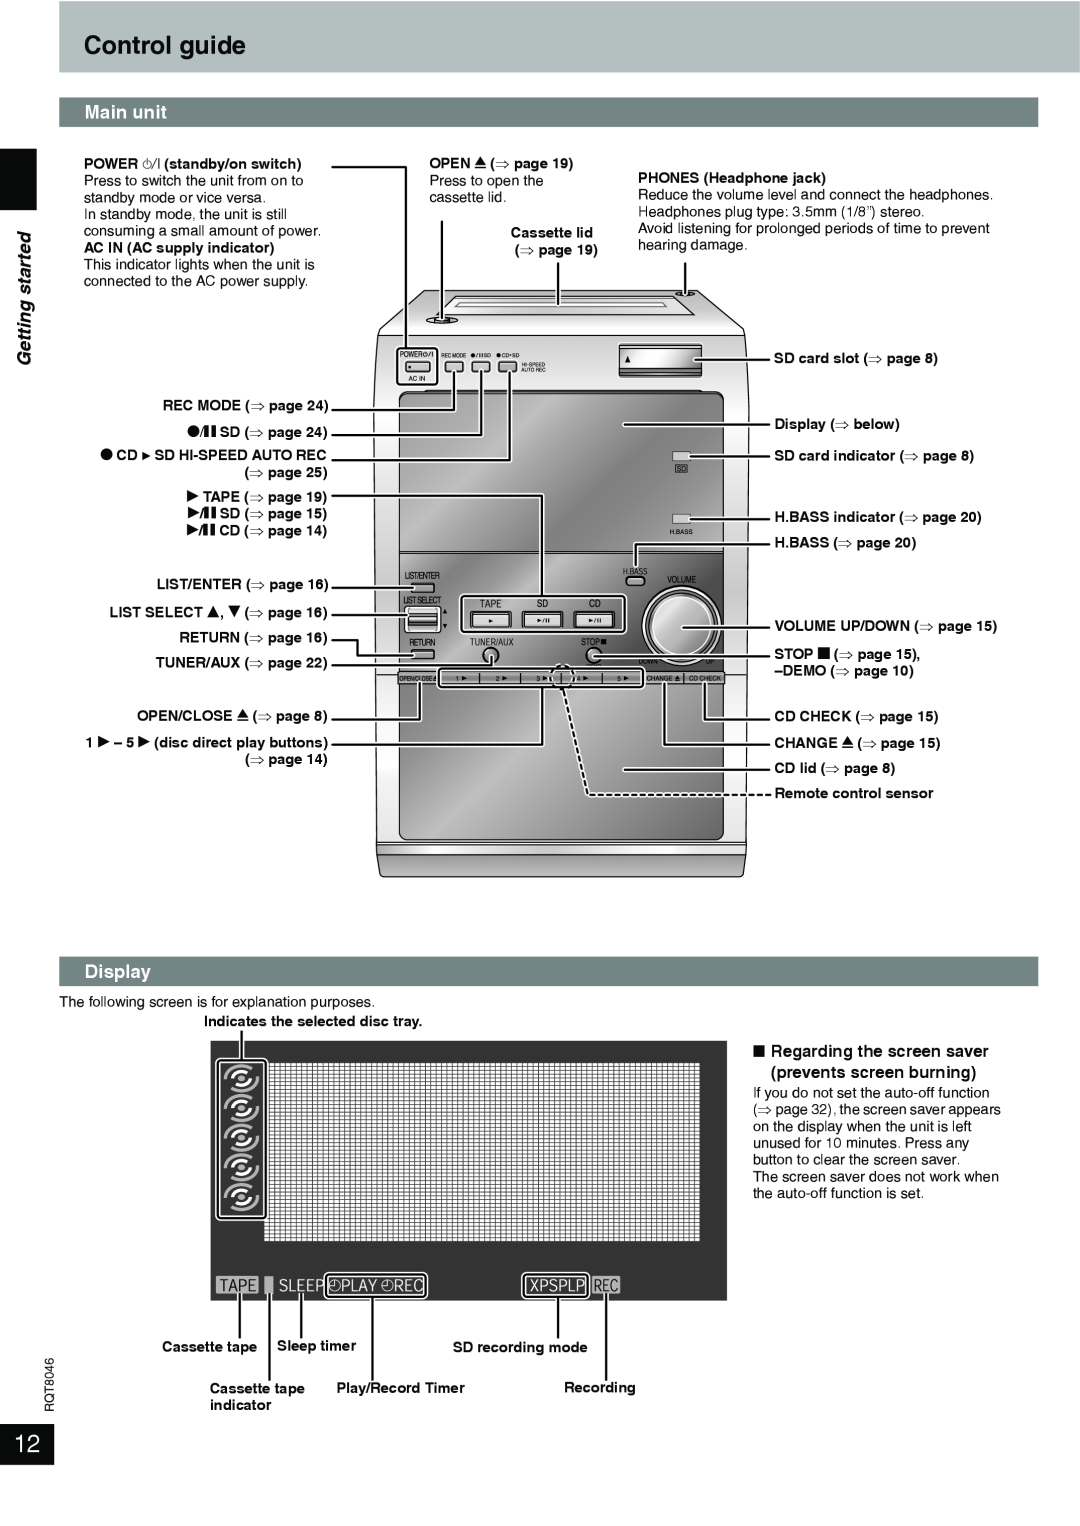 Panasonic SC-PM71SD manual Control guide, Main unit, Getting started, Display 